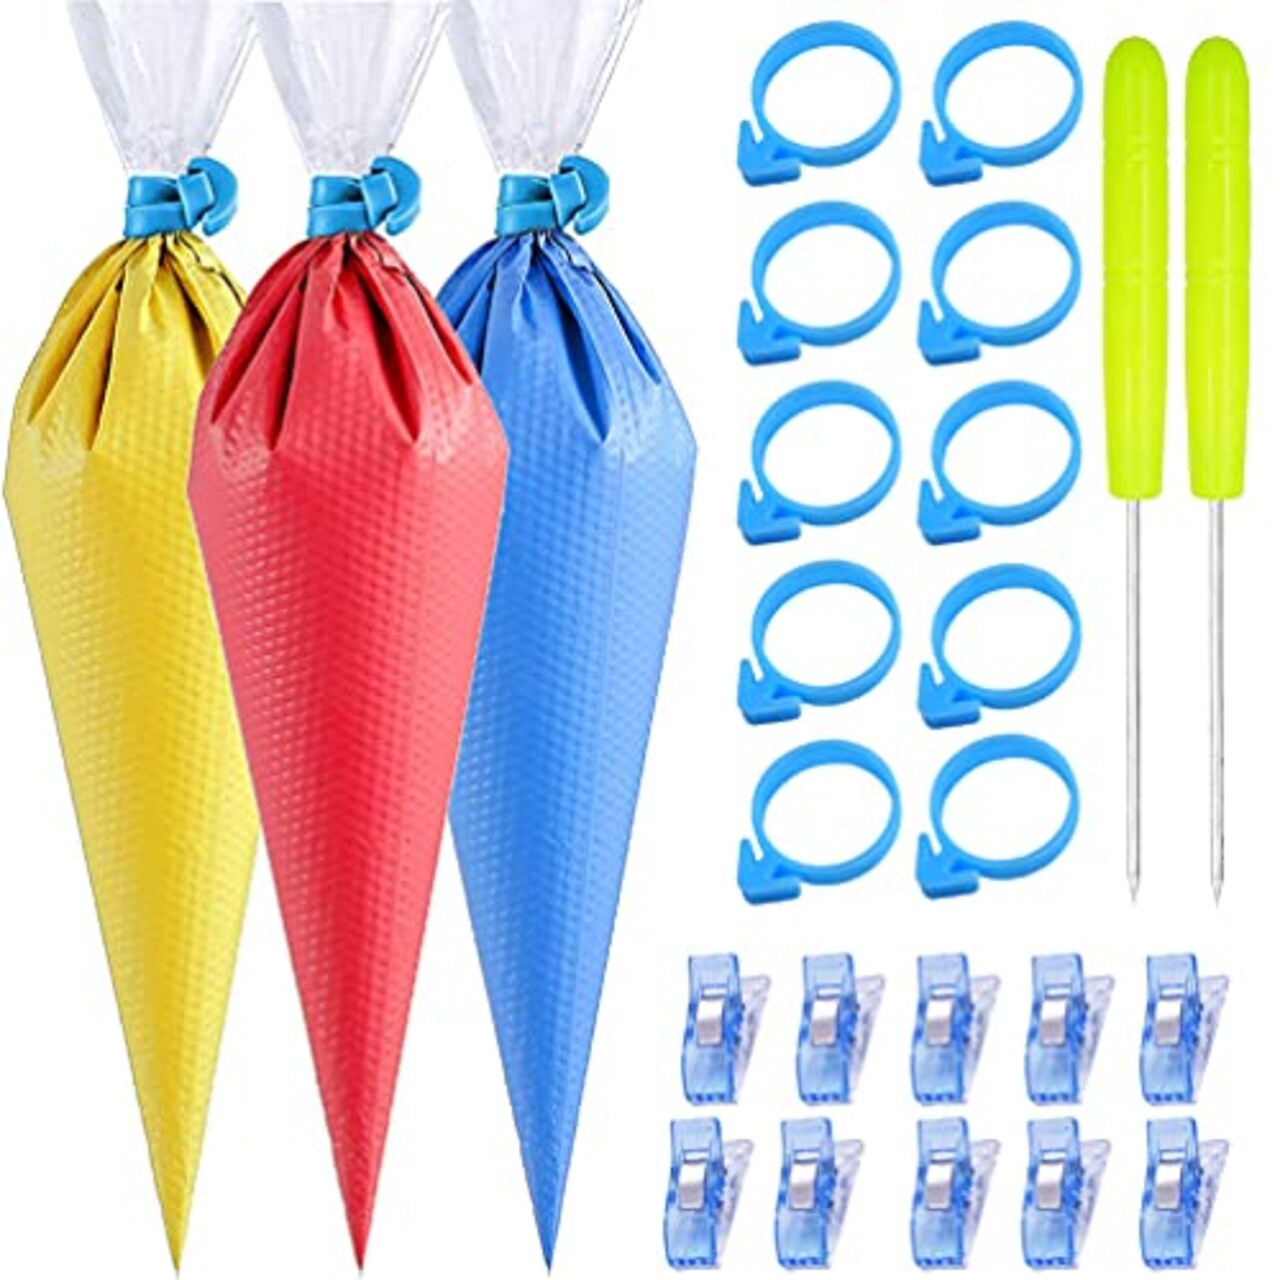 122Pieces Tipless Piping Bags - 100pcs Disposable Piping Pastry Bag for Royal  Icing/Cookies Decorating - 10 Pastry Bag Ties,10 Clips &2 Scriber Needle -  Best Cookie Tools (12 Inch)